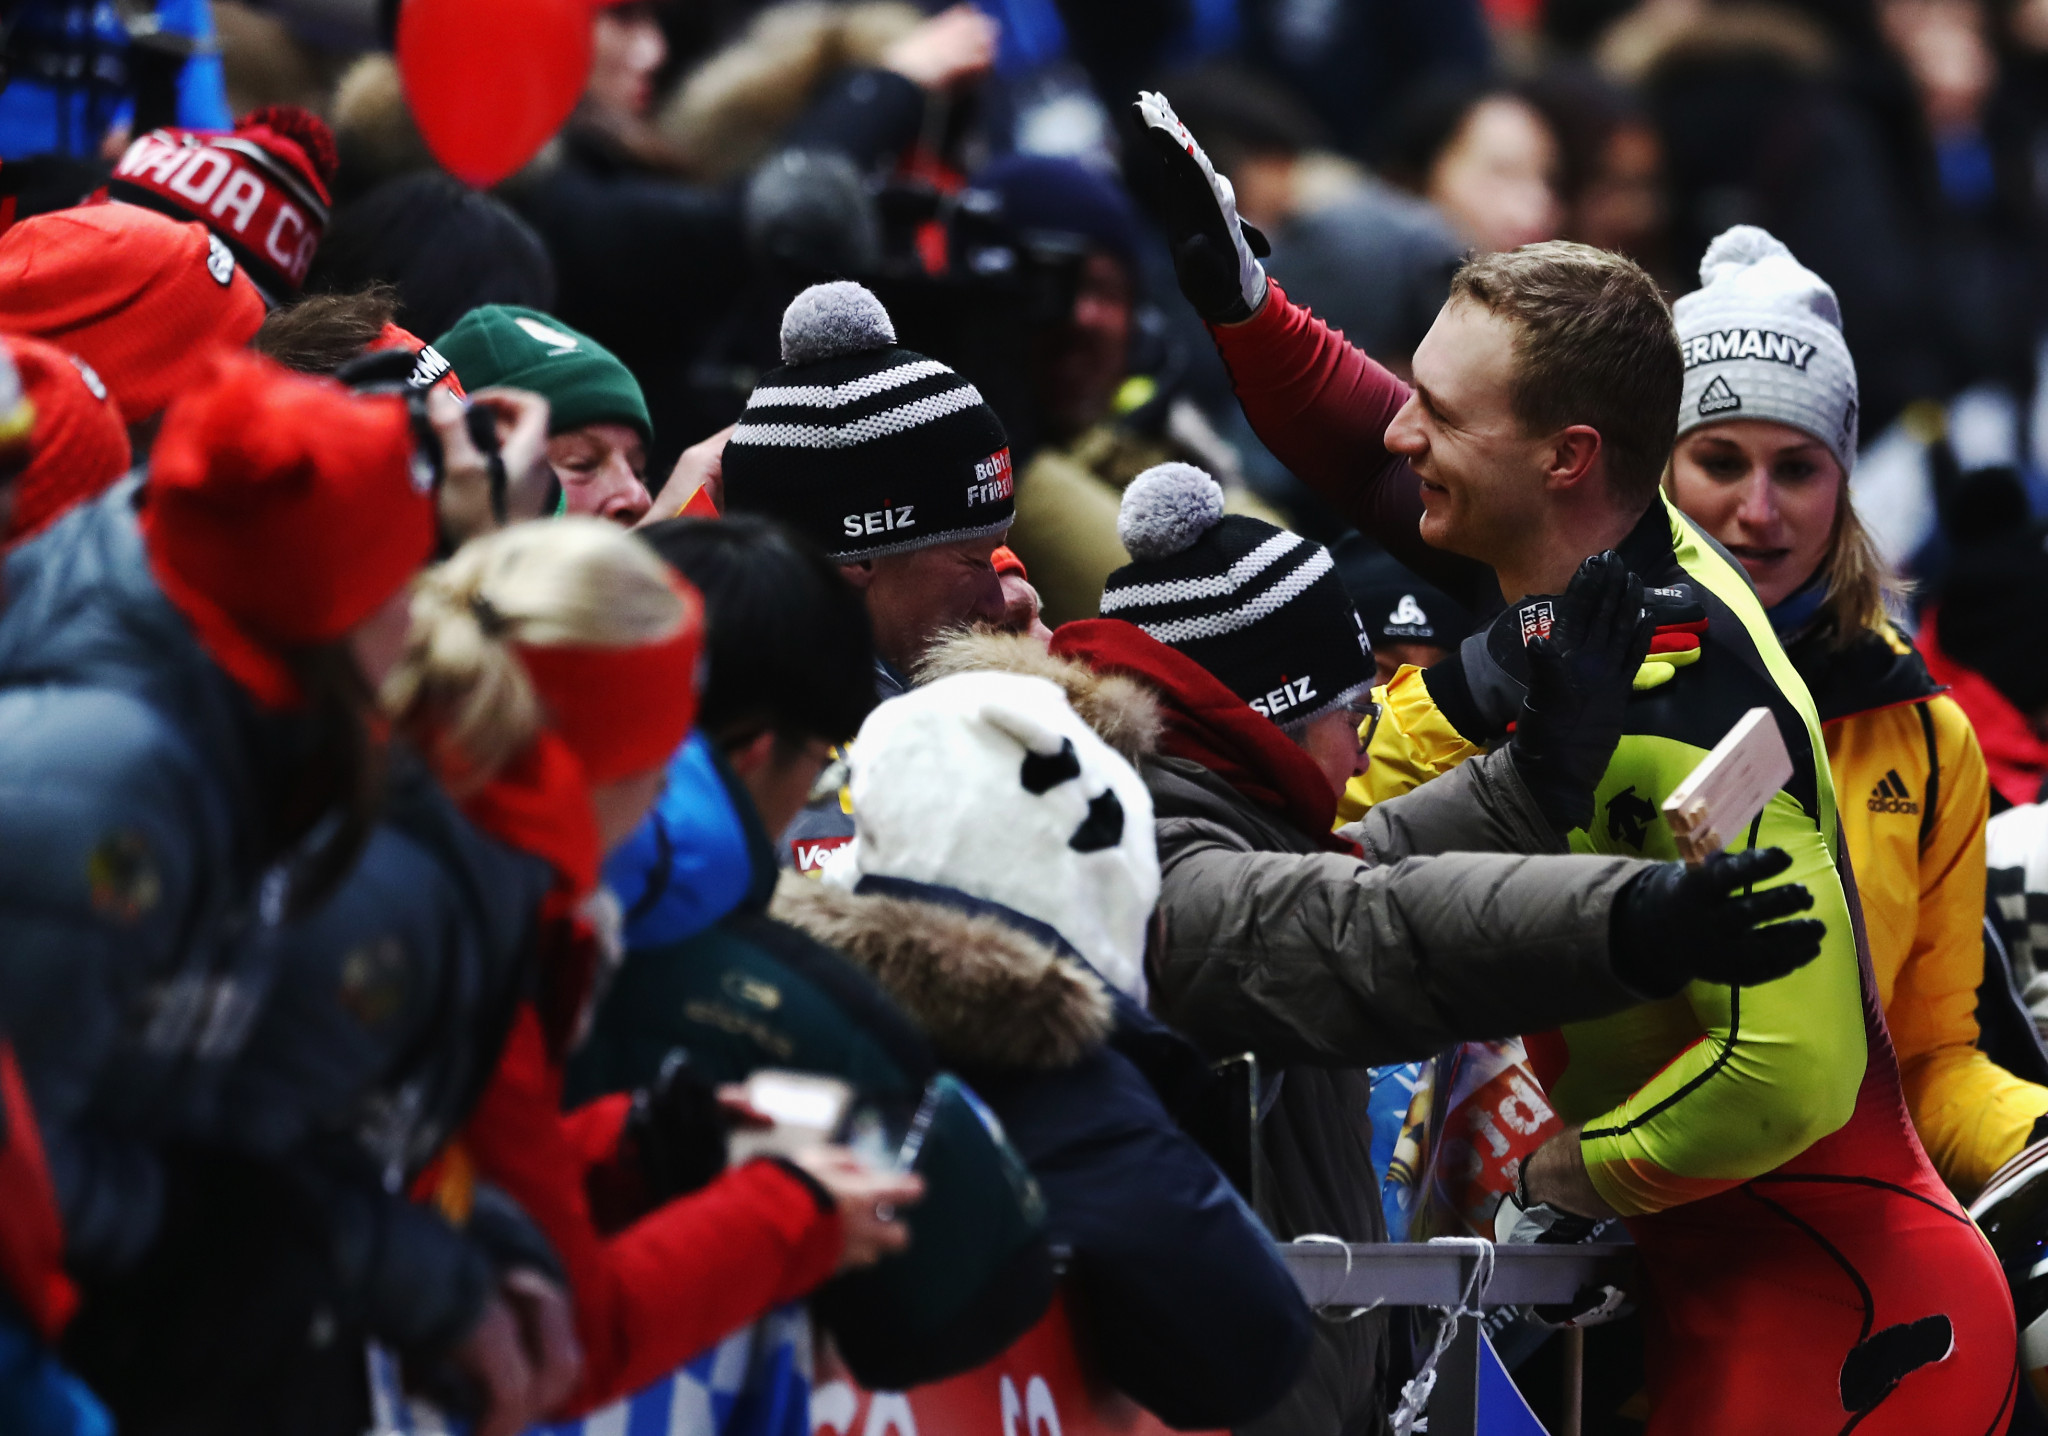 Francesco Friedrich of Germany is mobbed by spectators after winning a share of bobsleigh gold ©Getty Images